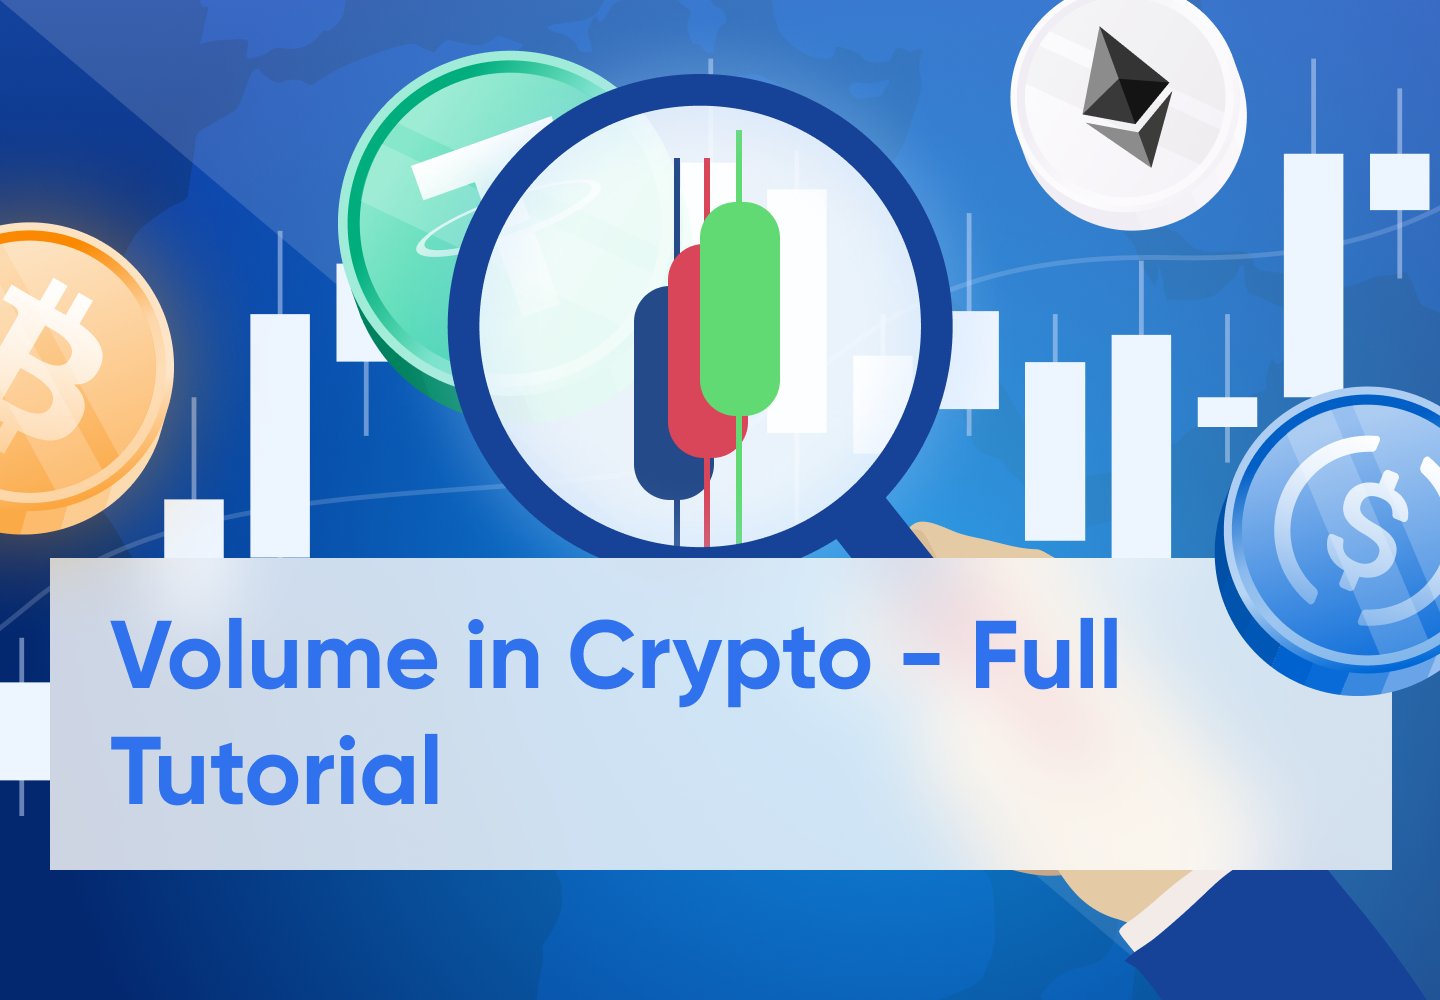 What Is Volume in Cryptocurrency?